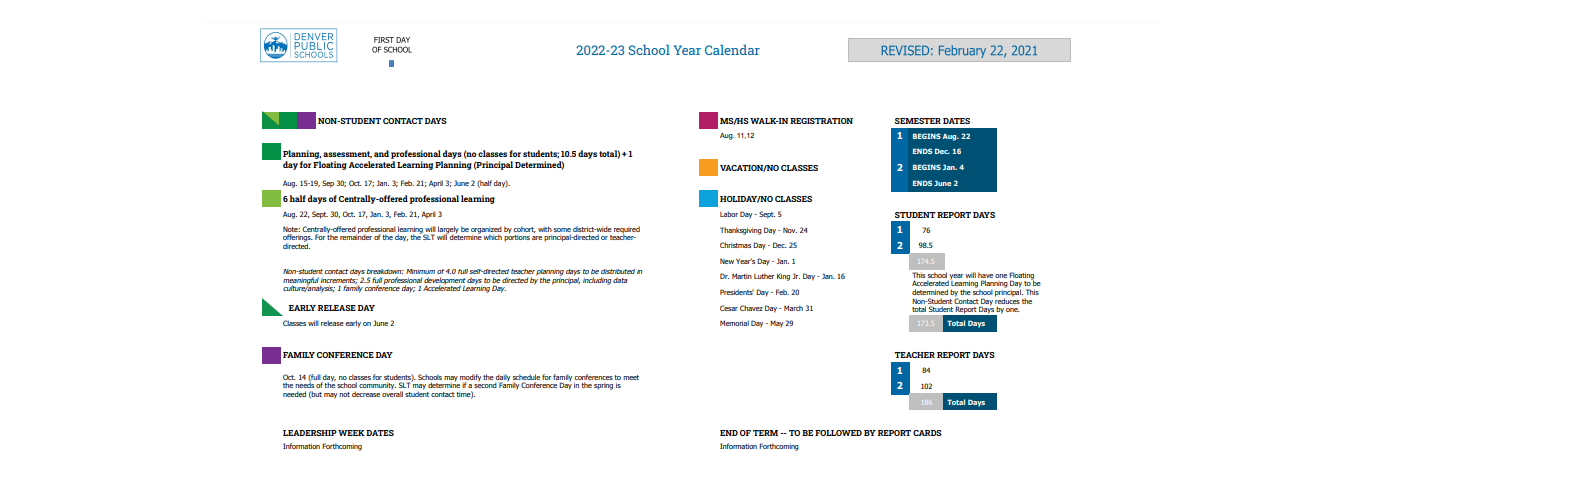 District School Academic Calendar Key for Connections Academy